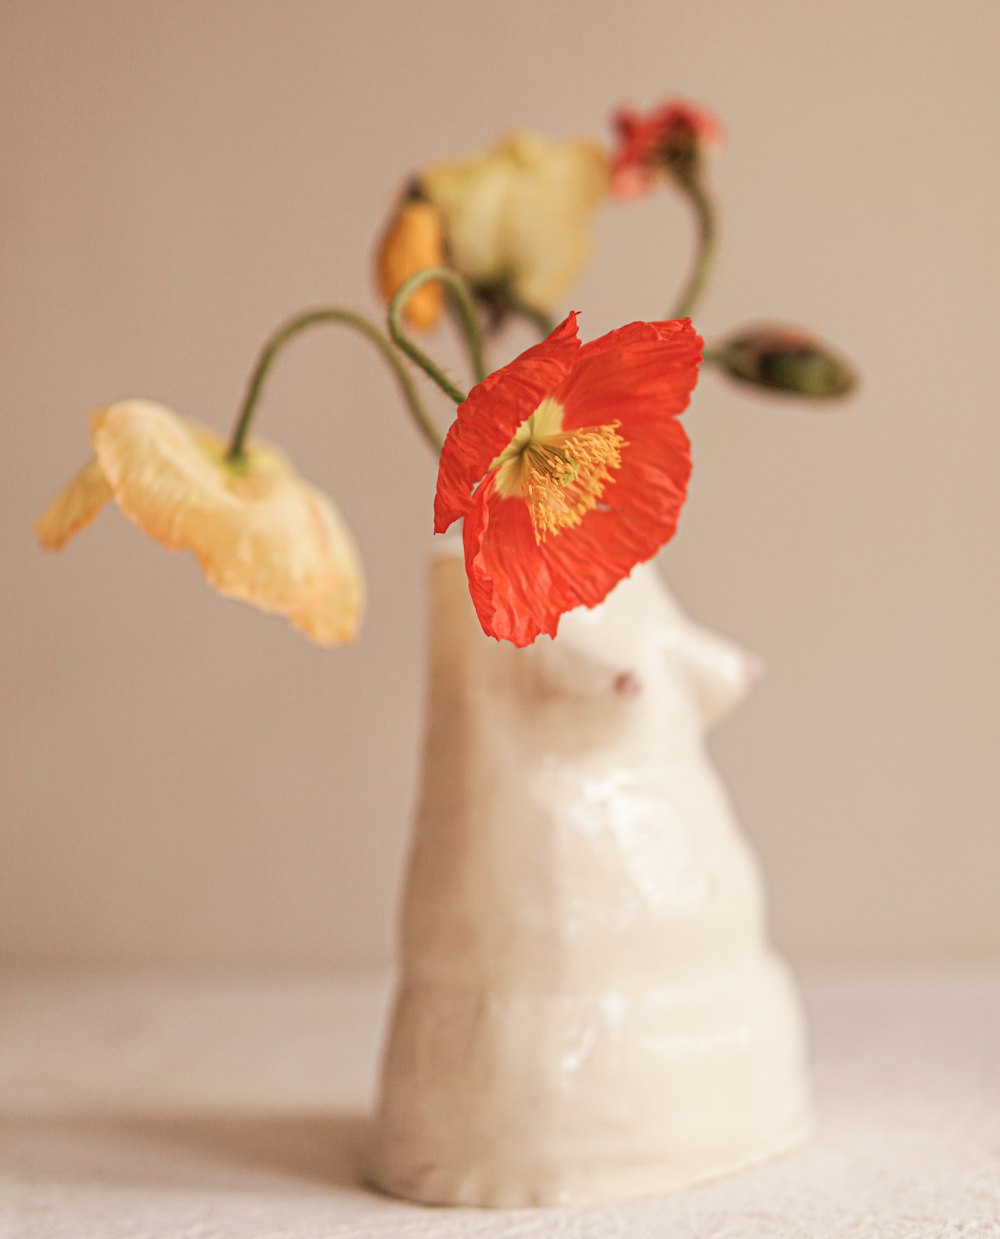 a white vase with a red flower in it